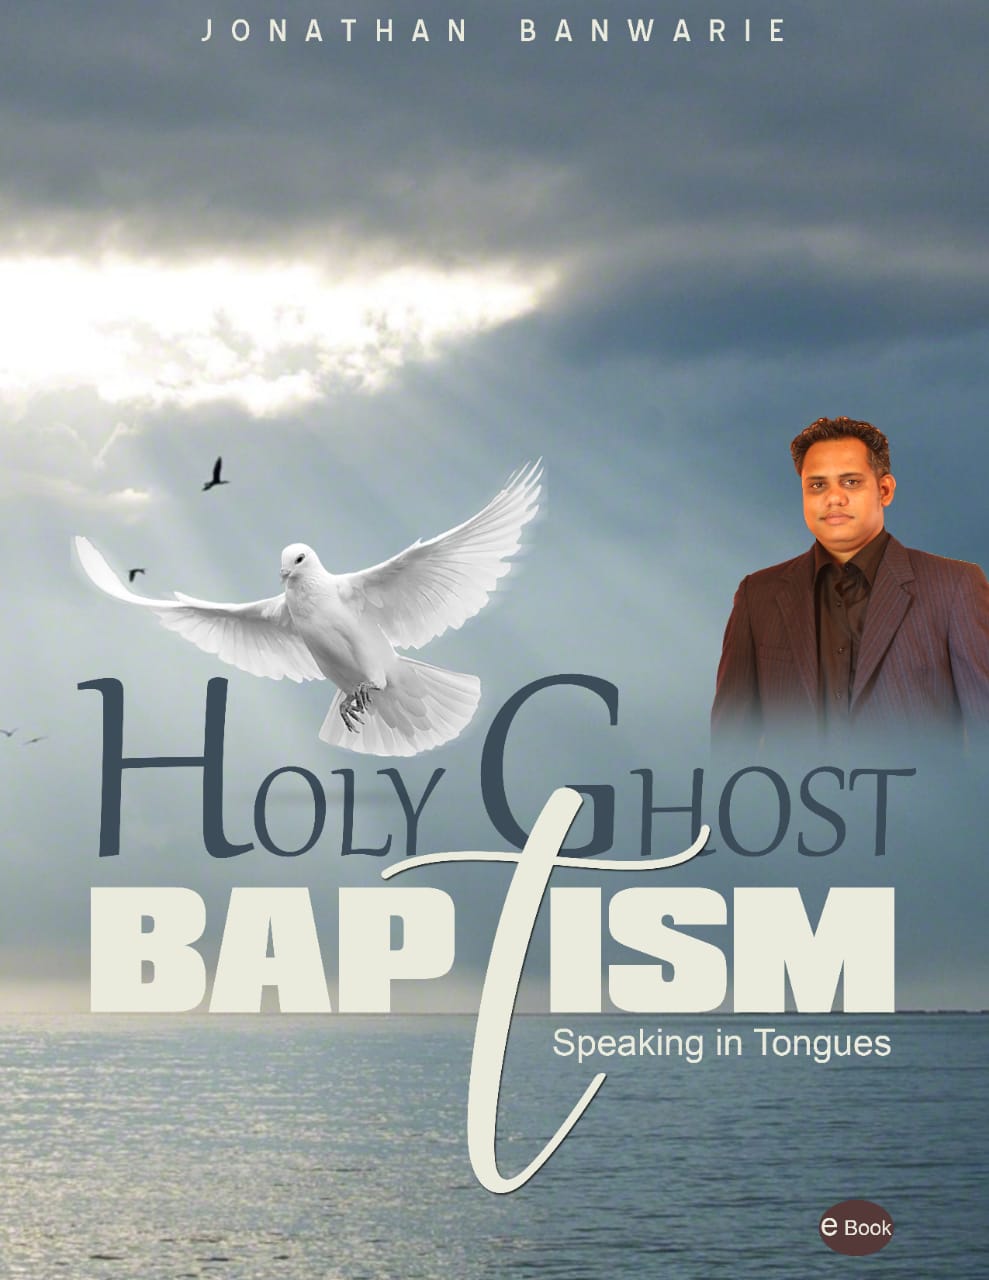 Ghost Missionary Man